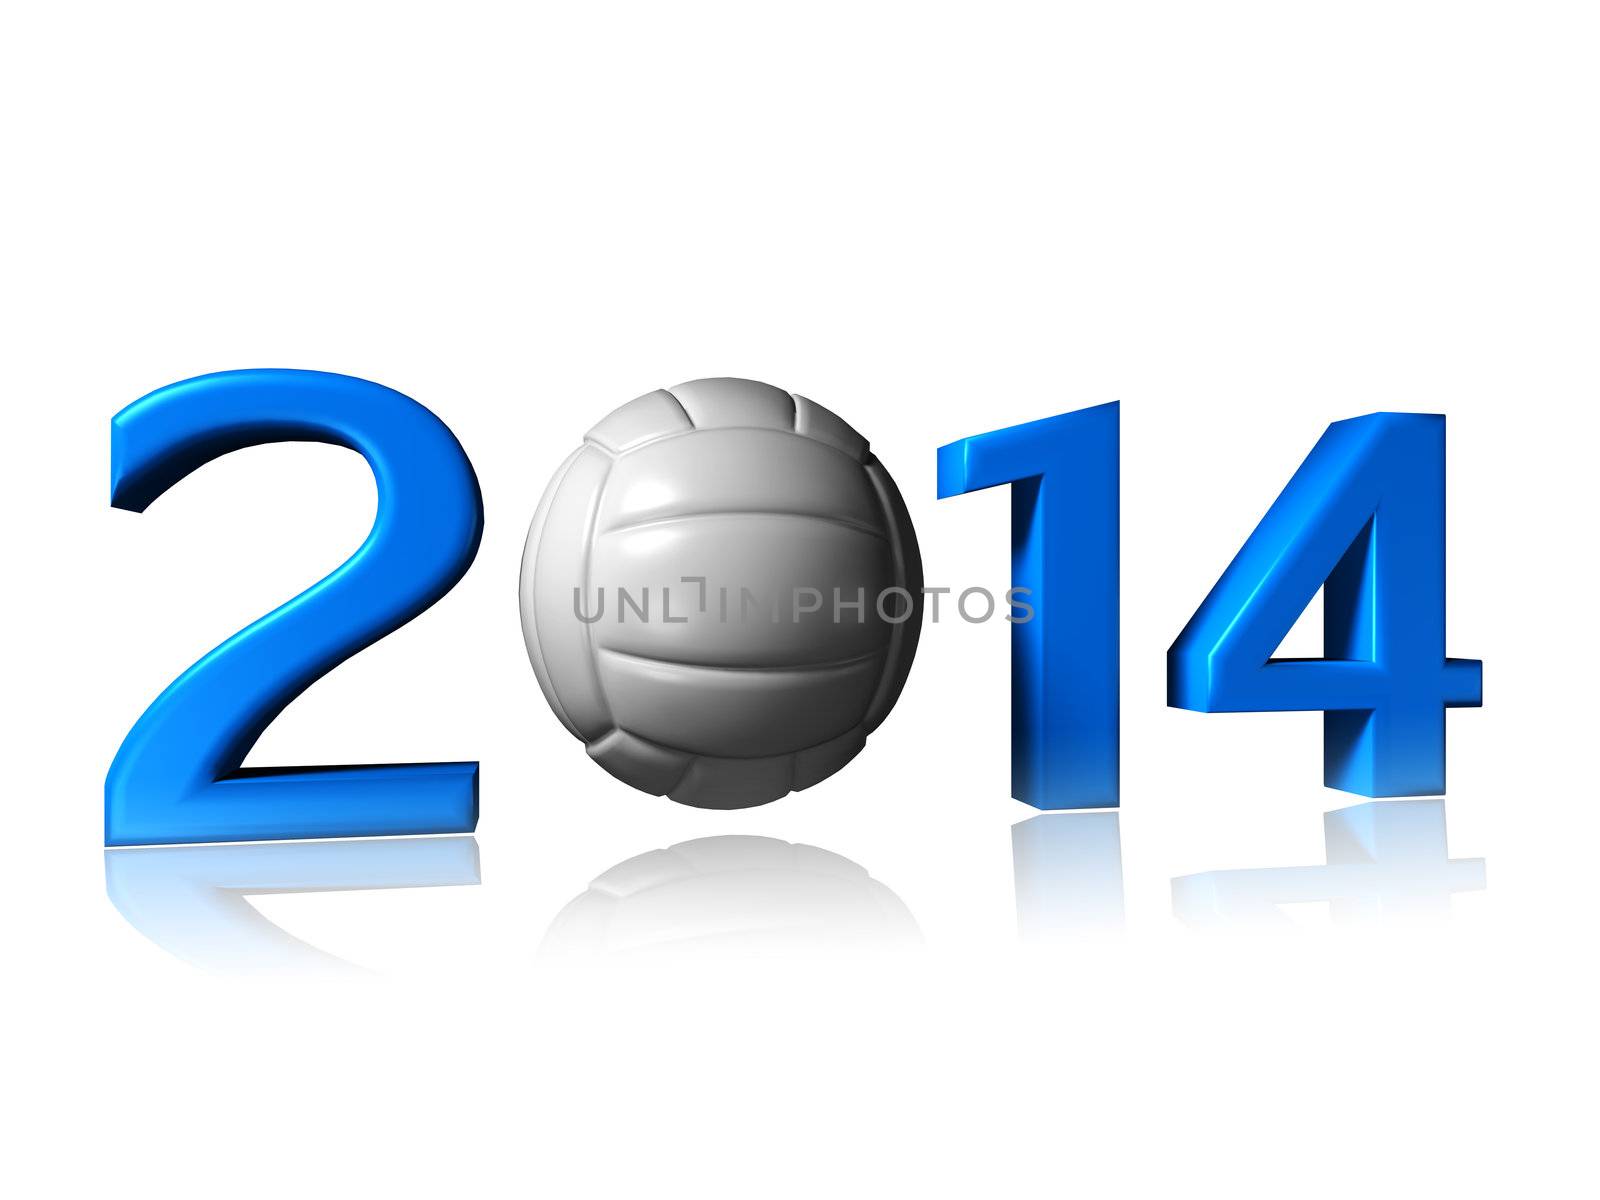 It's a big 2014 volley logo on a white background